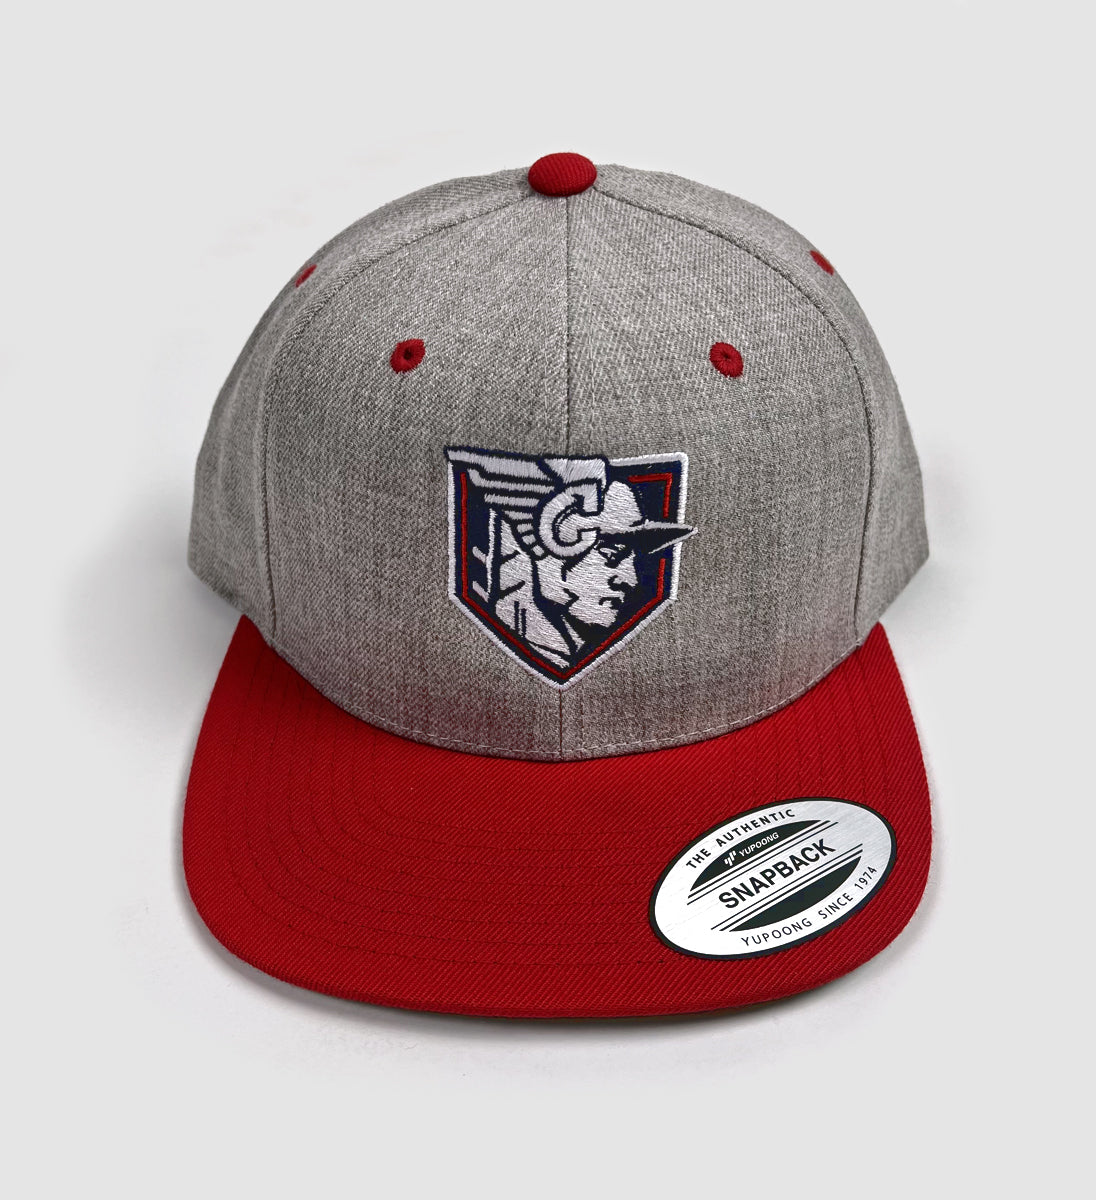 Cleveland Baseball Statue Snap Back Hat Grey/Red